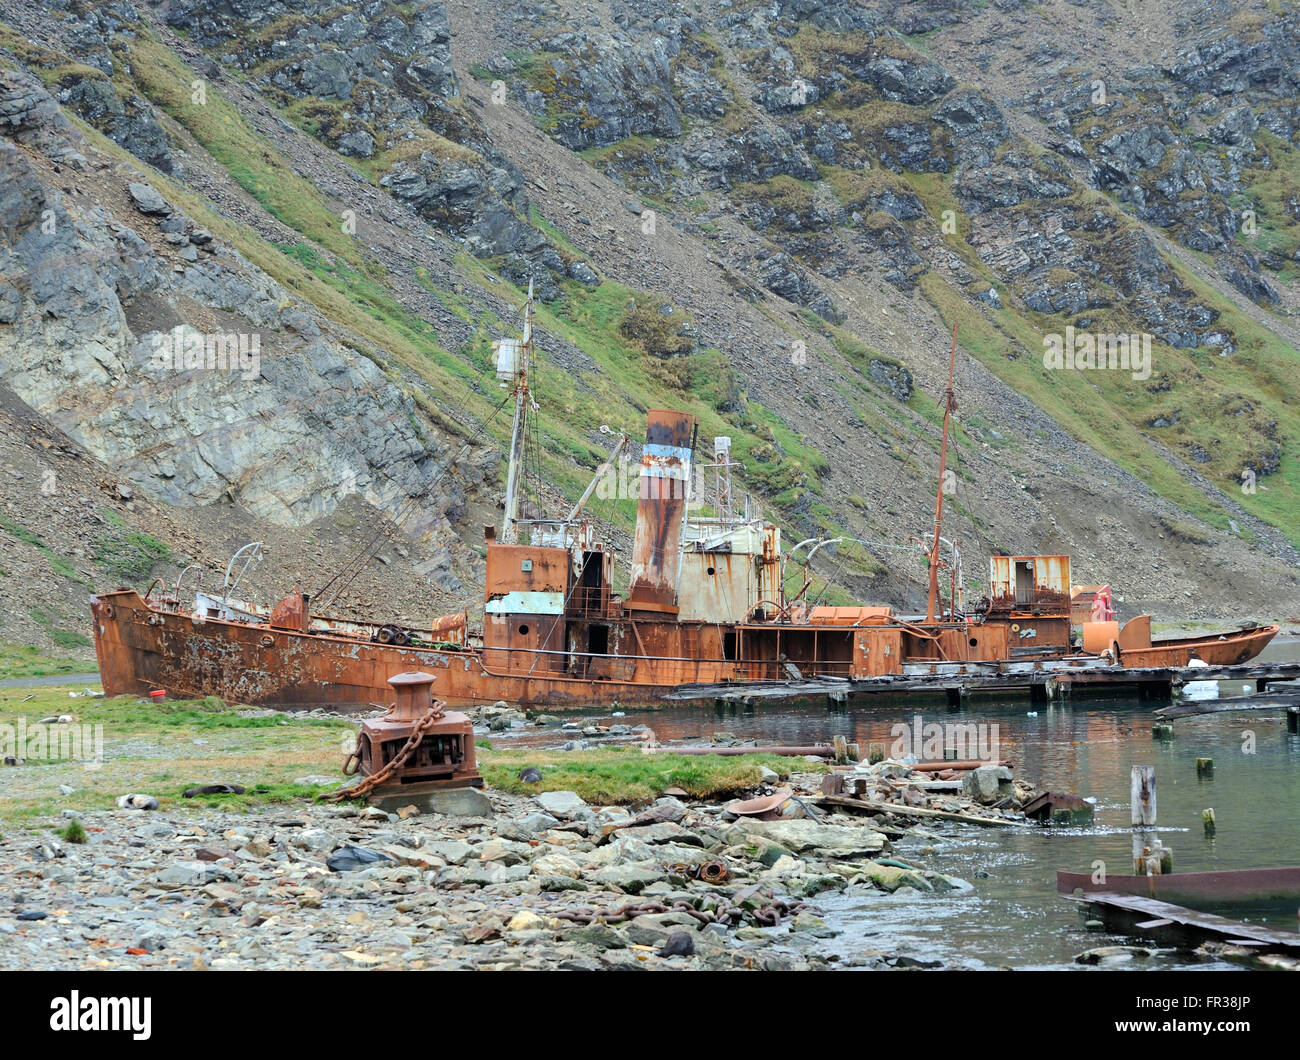 A whaling boat  beached in the ruins of the Grytviken whaling station and a view of King Edward Cove. Grytviken, South Georgia Stock Photo